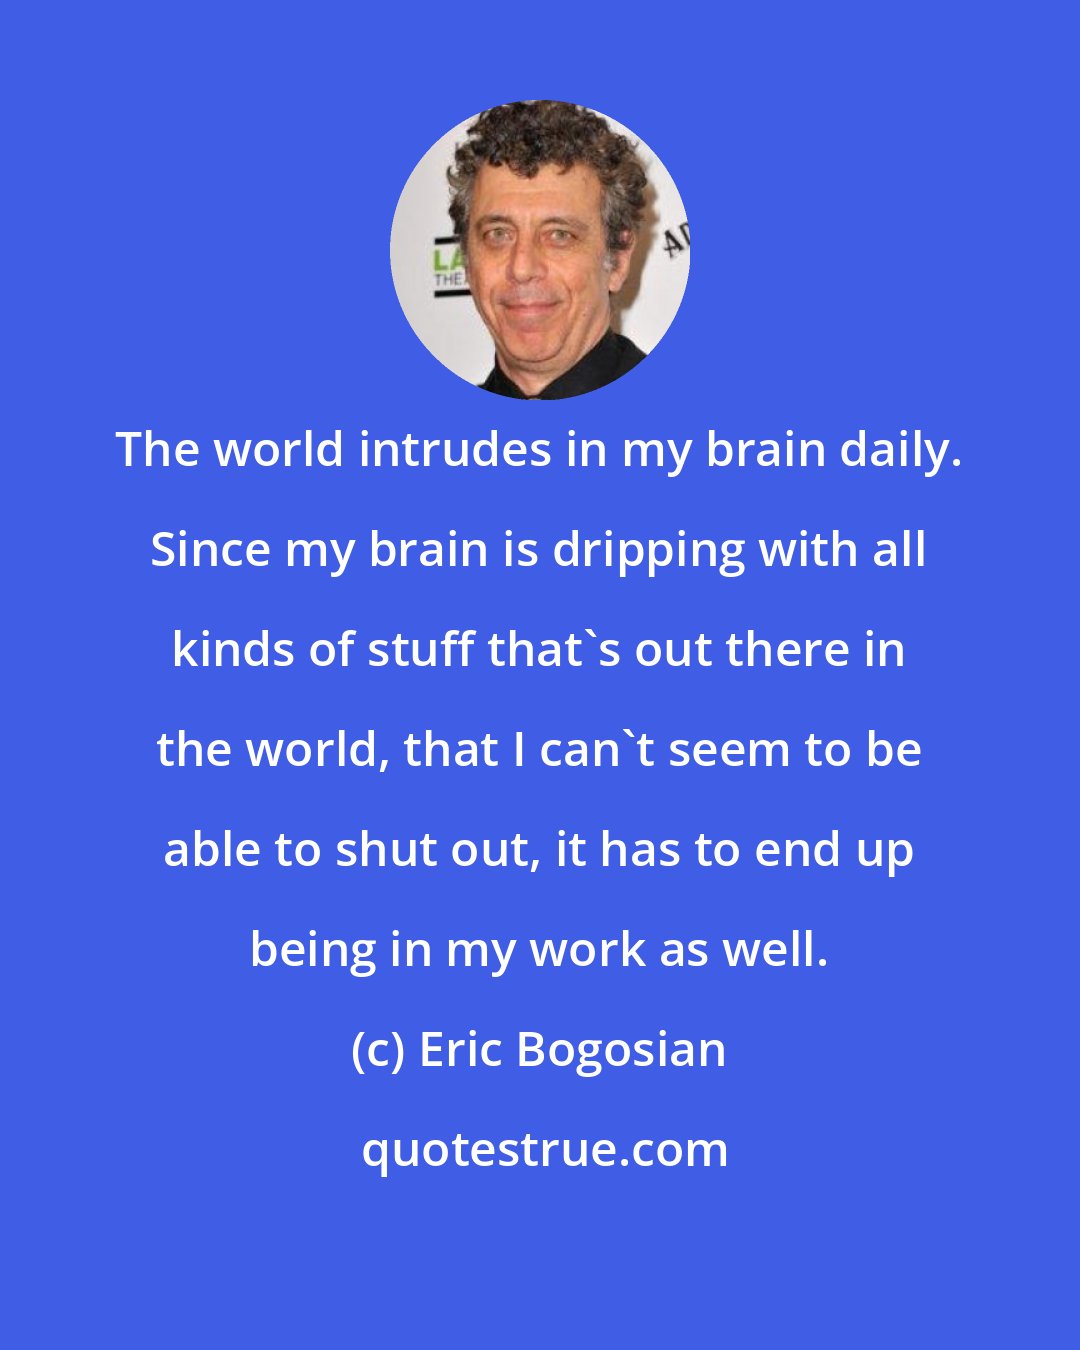 Eric Bogosian: The world intrudes in my brain daily. Since my brain is dripping with all kinds of stuff that's out there in the world, that I can't seem to be able to shut out, it has to end up being in my work as well.